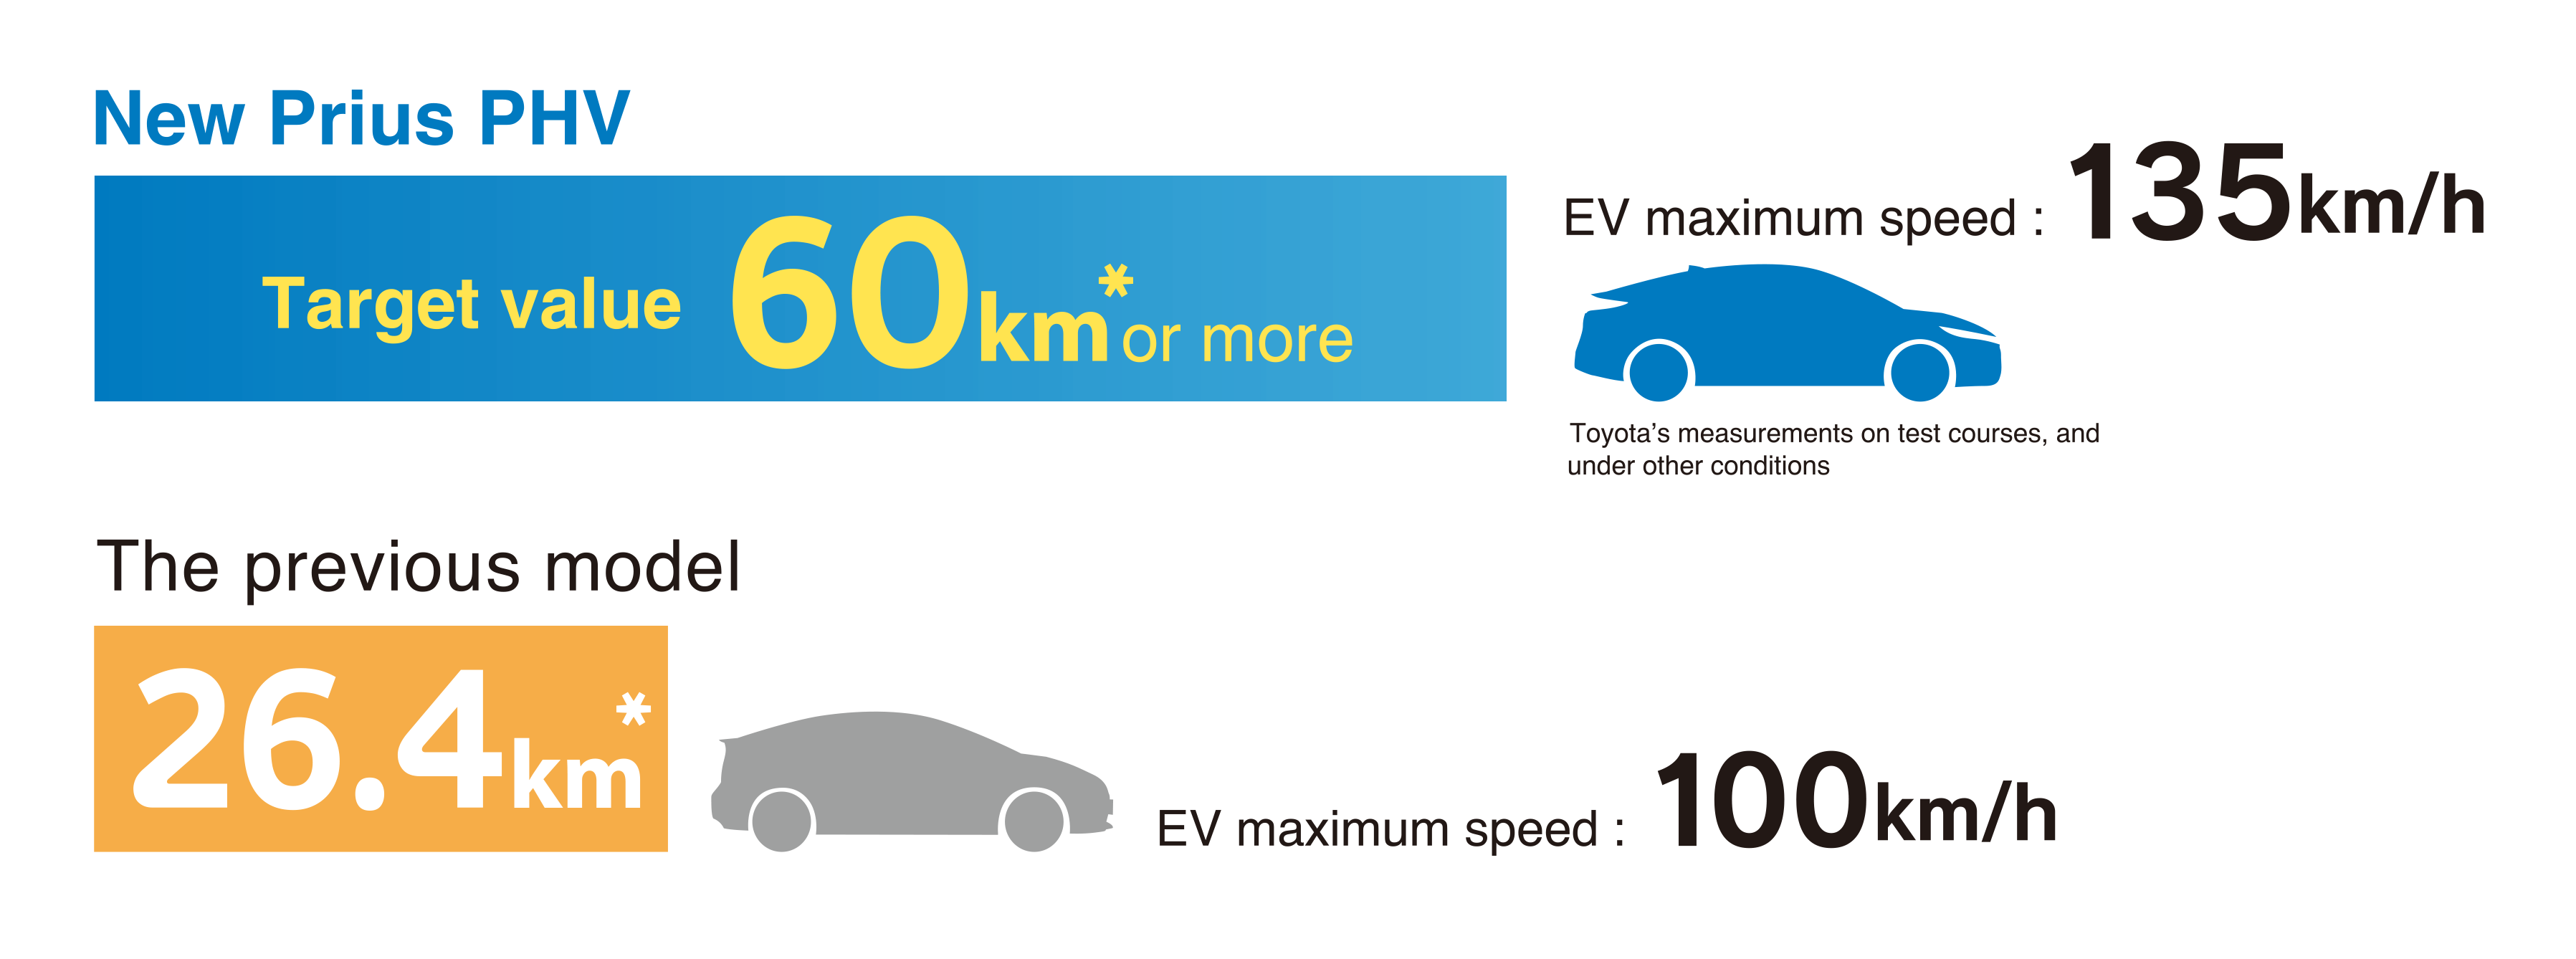 Significantly extended EV cruising range